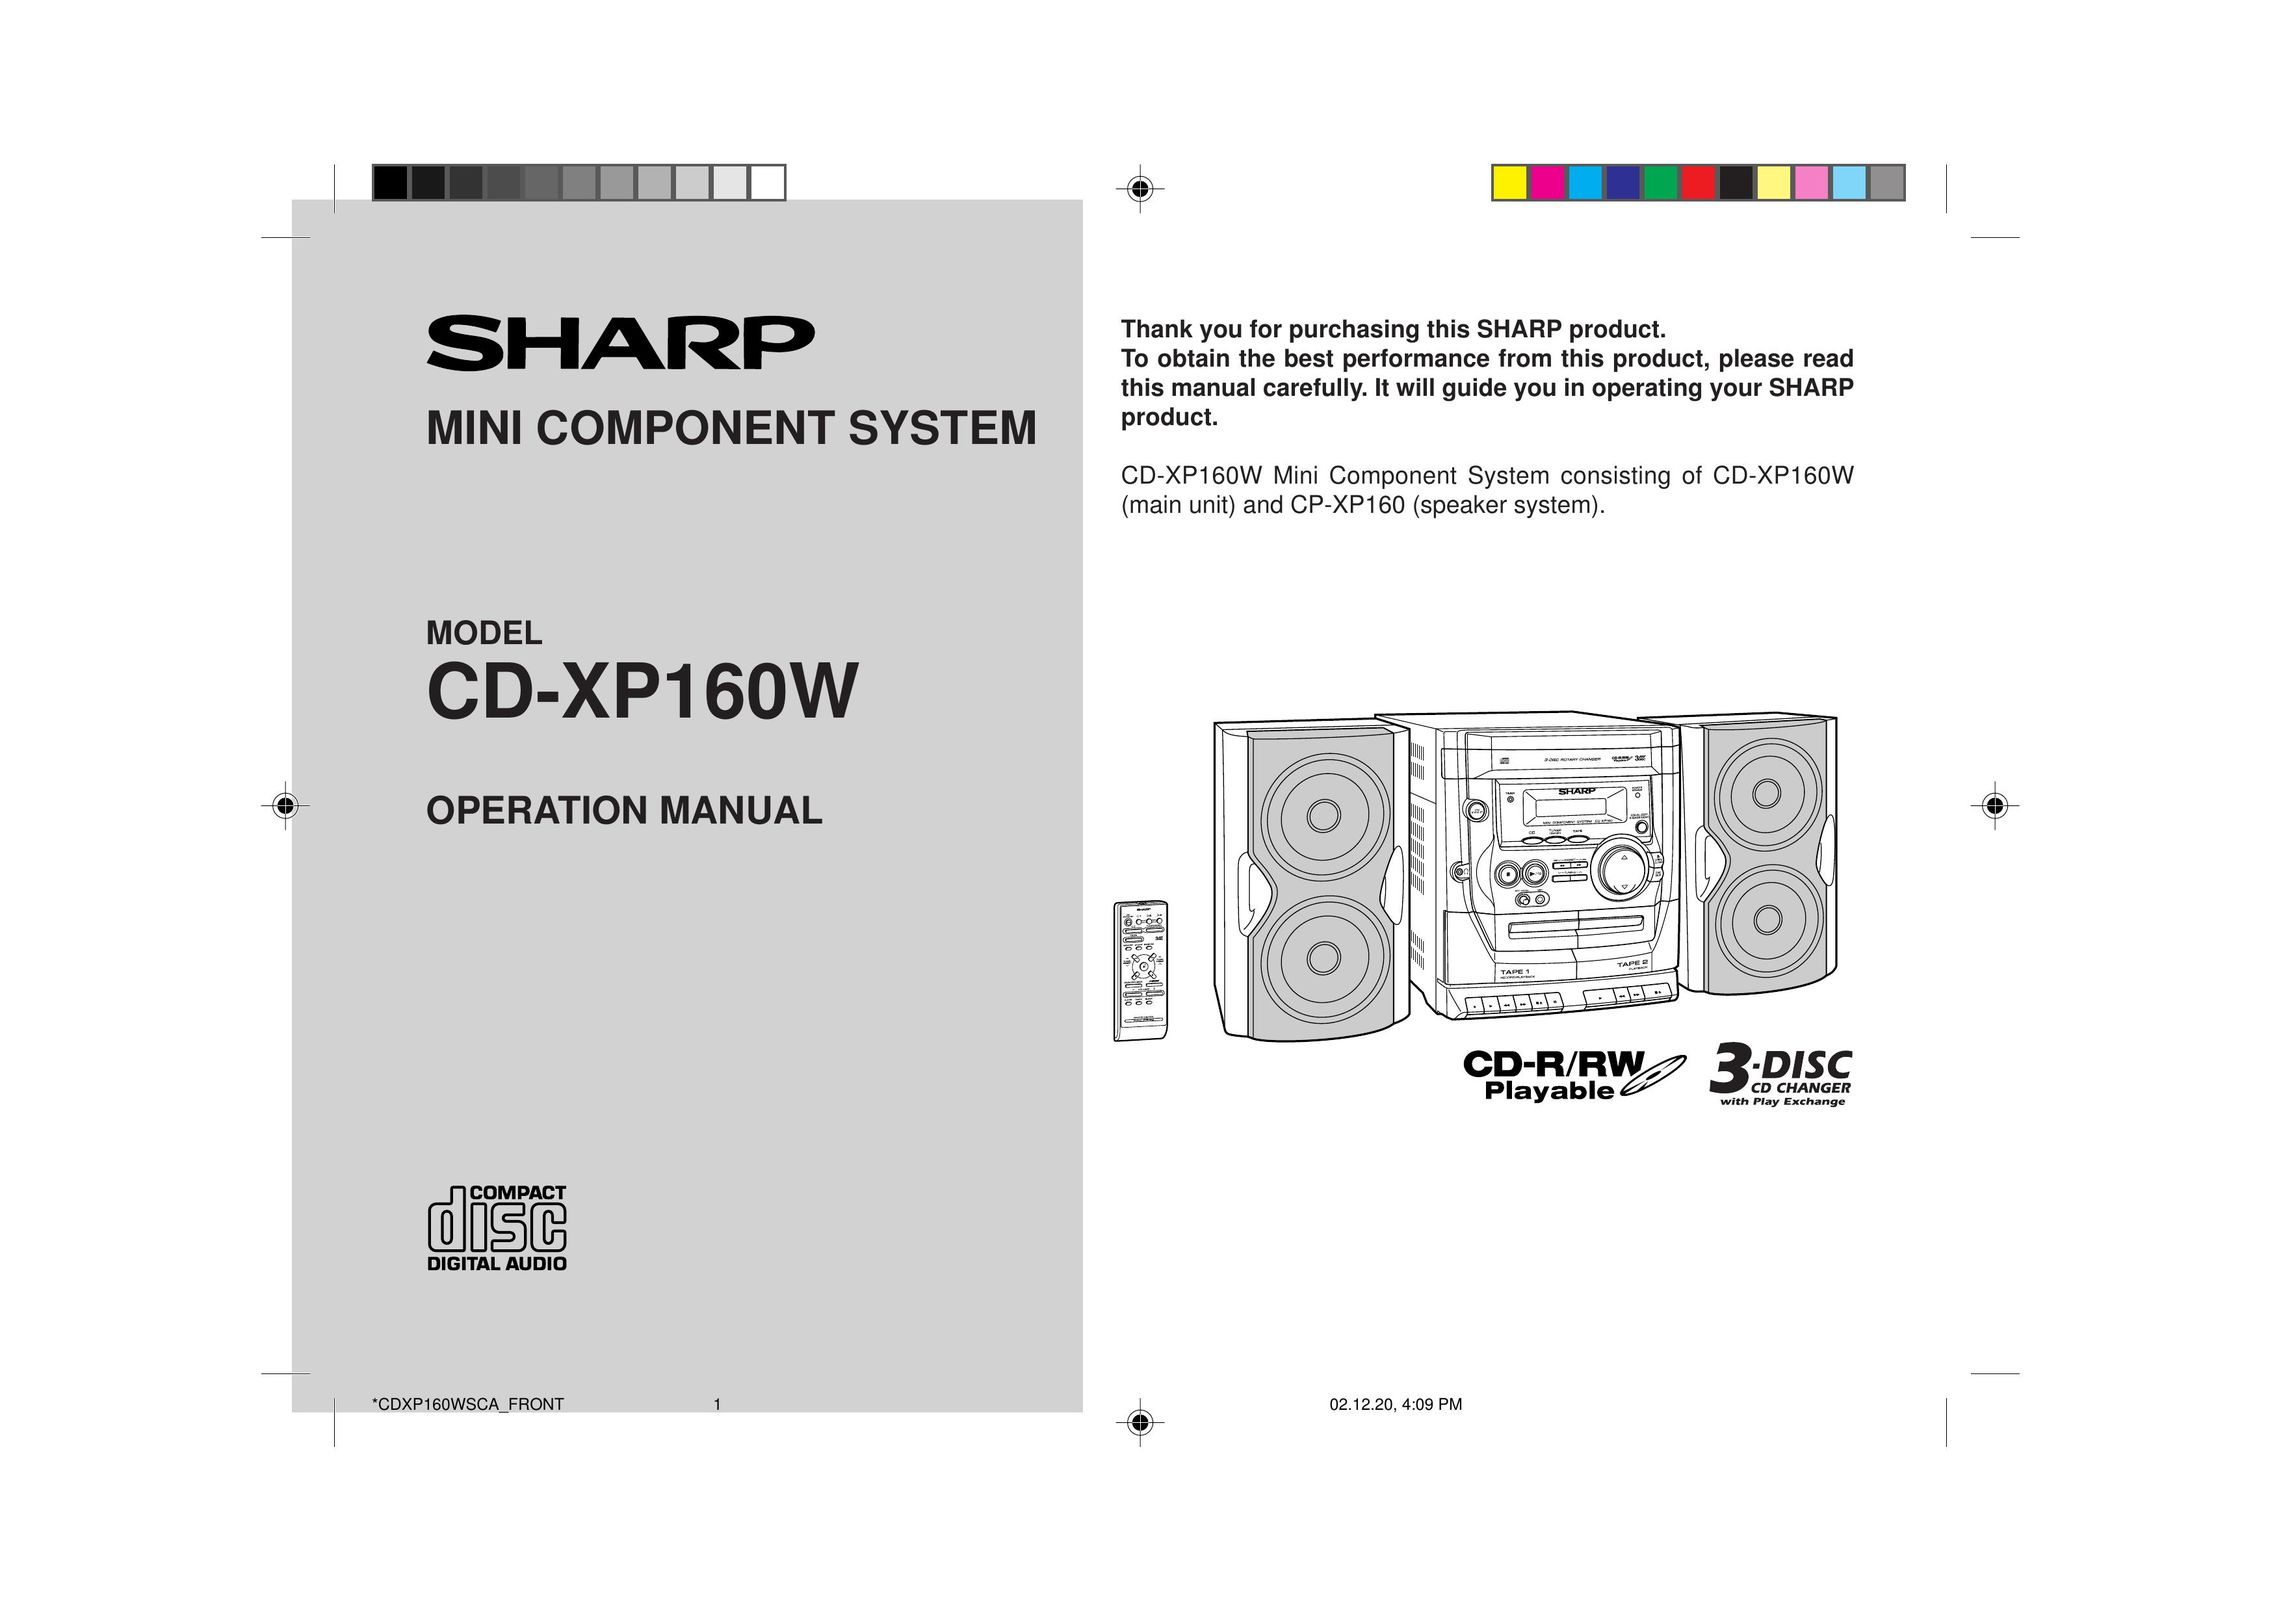 Sharp CD-XP160W Home Theater System User Manual